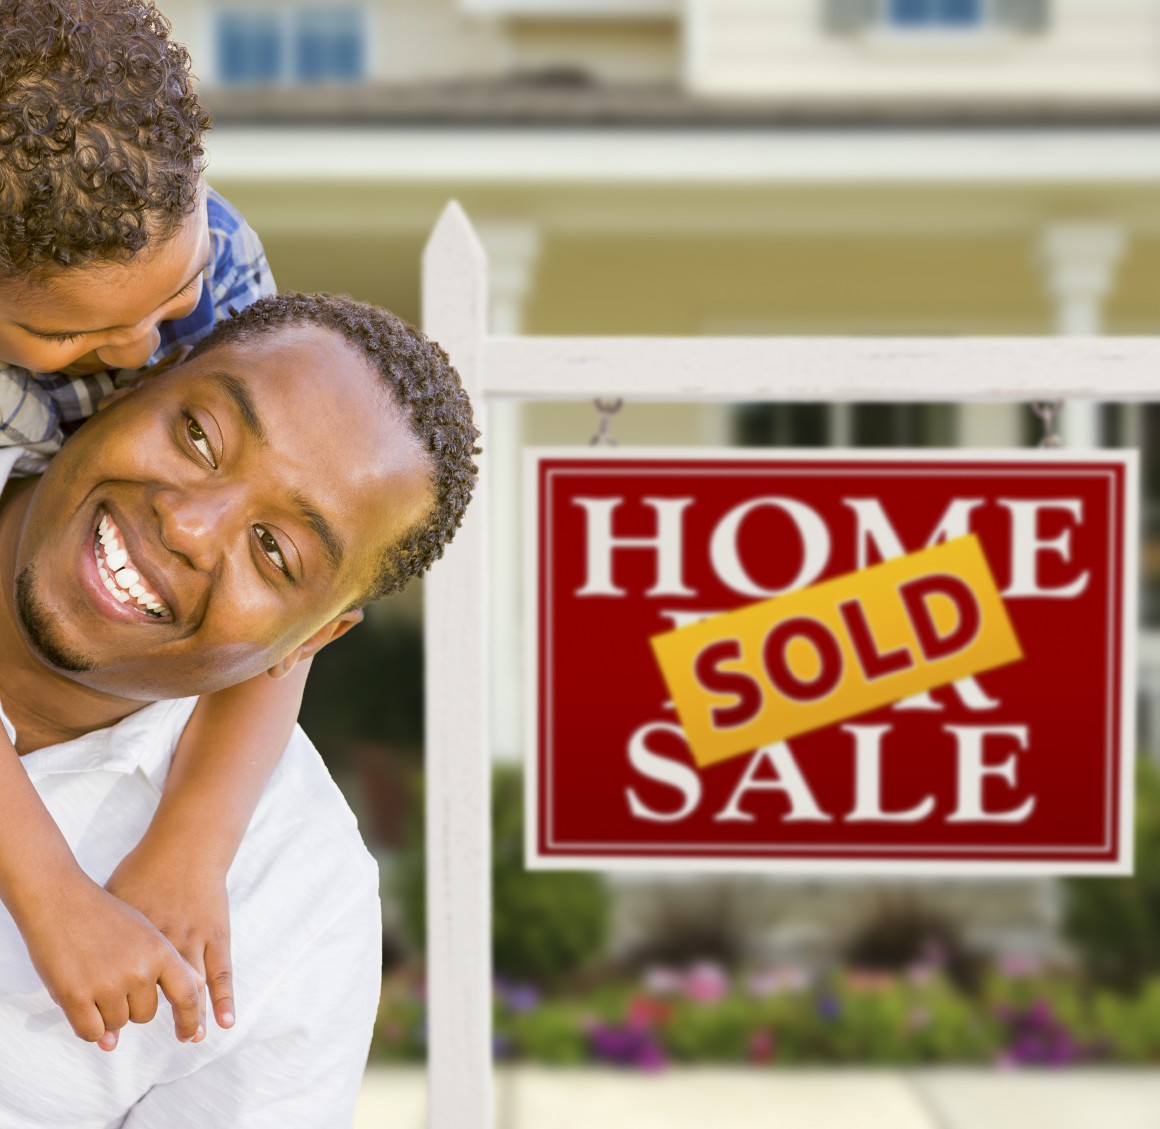 4 Simple Ways To Increase Your Home’s Resale Value Immediately